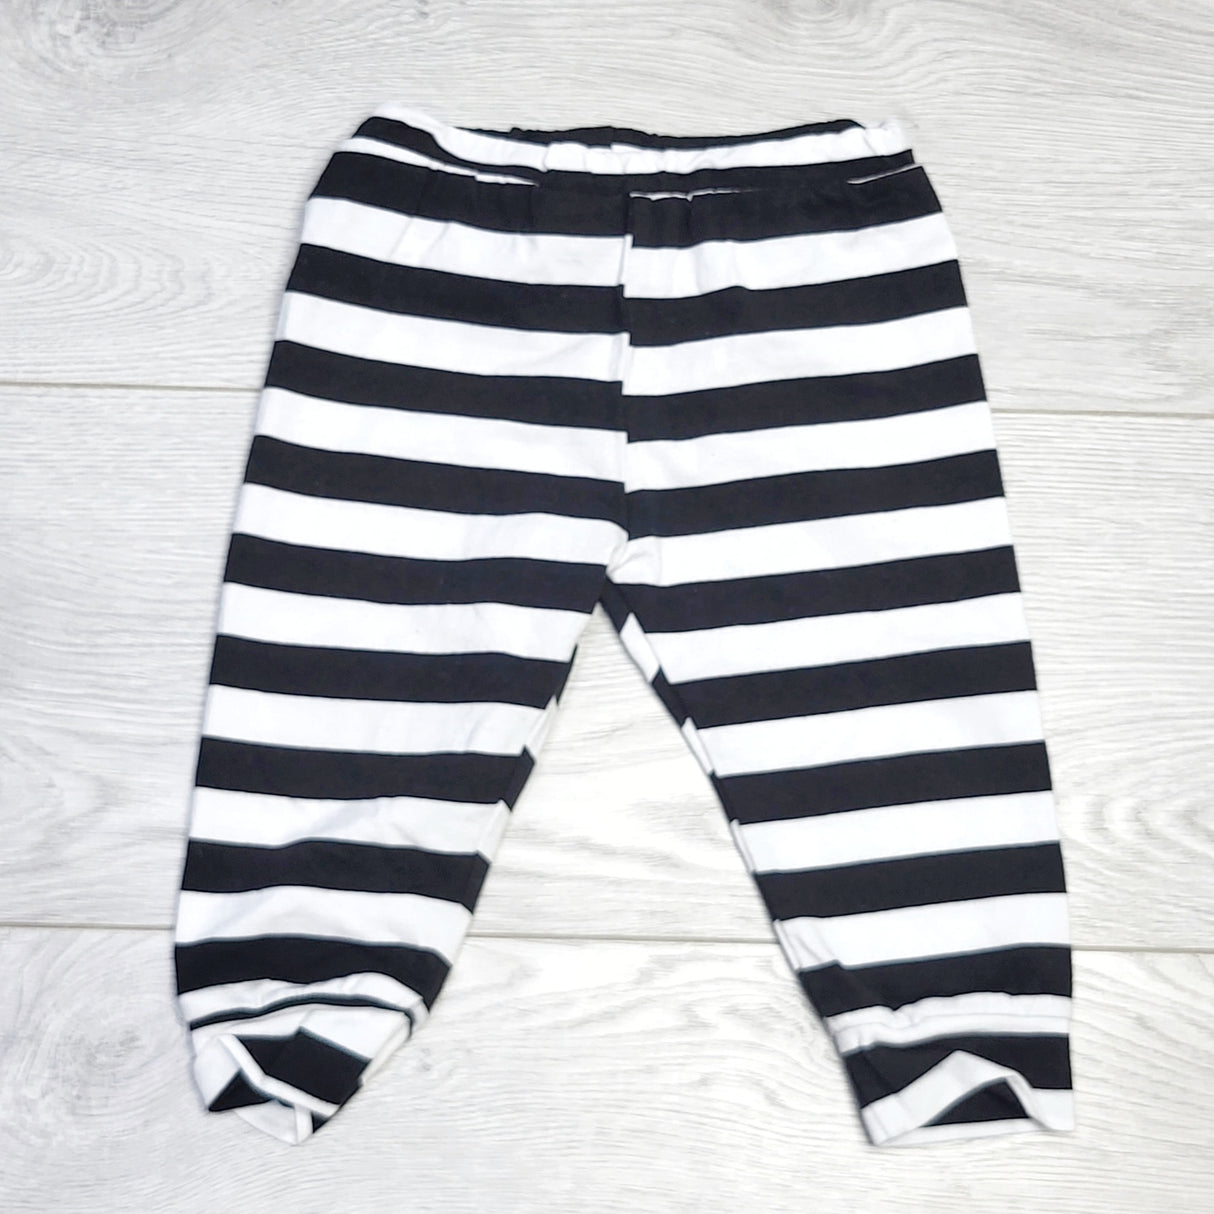 RZA2 - Black and white striped cotton pants. Size 12-18 months